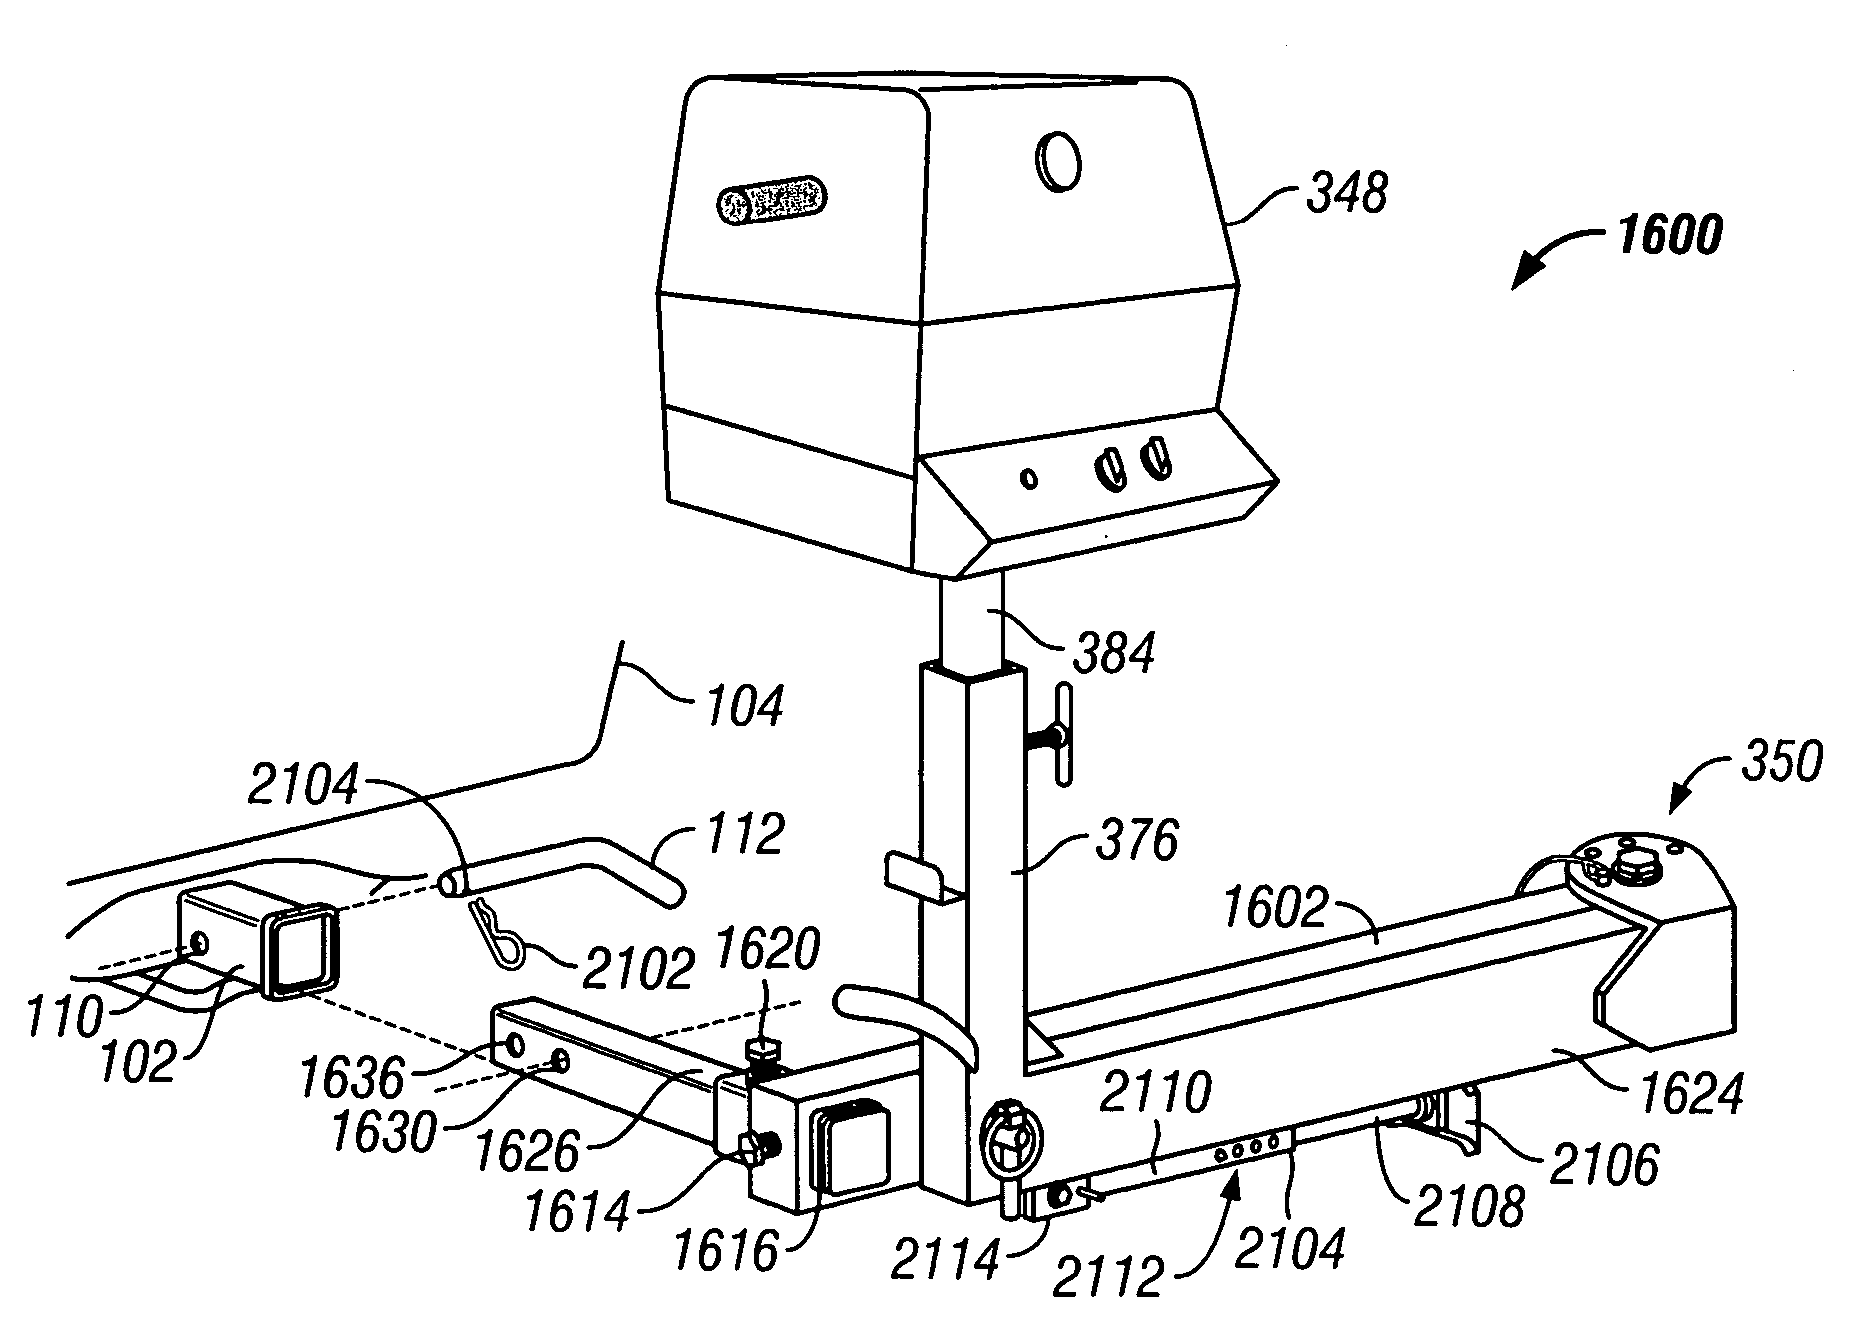 Swingable apparatus attachable to a vehicle for transporting a device and permitting access to the vehicle